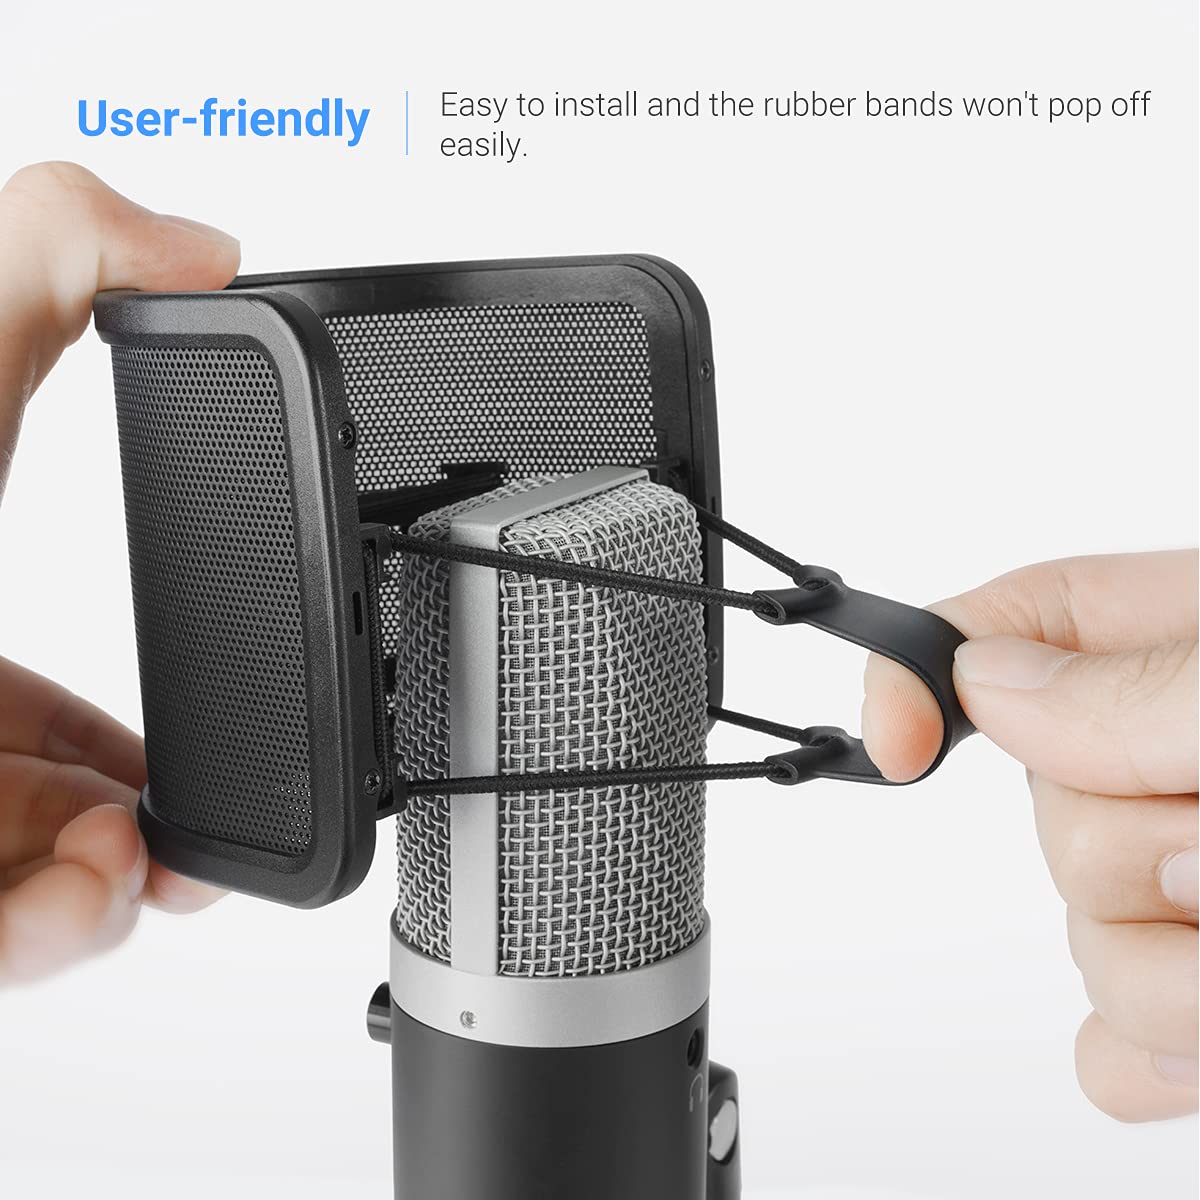 FIFINE USB Podcast Condenser Microphone with Pop Filter for Recording On Laptop PC Computer (K669+U1)